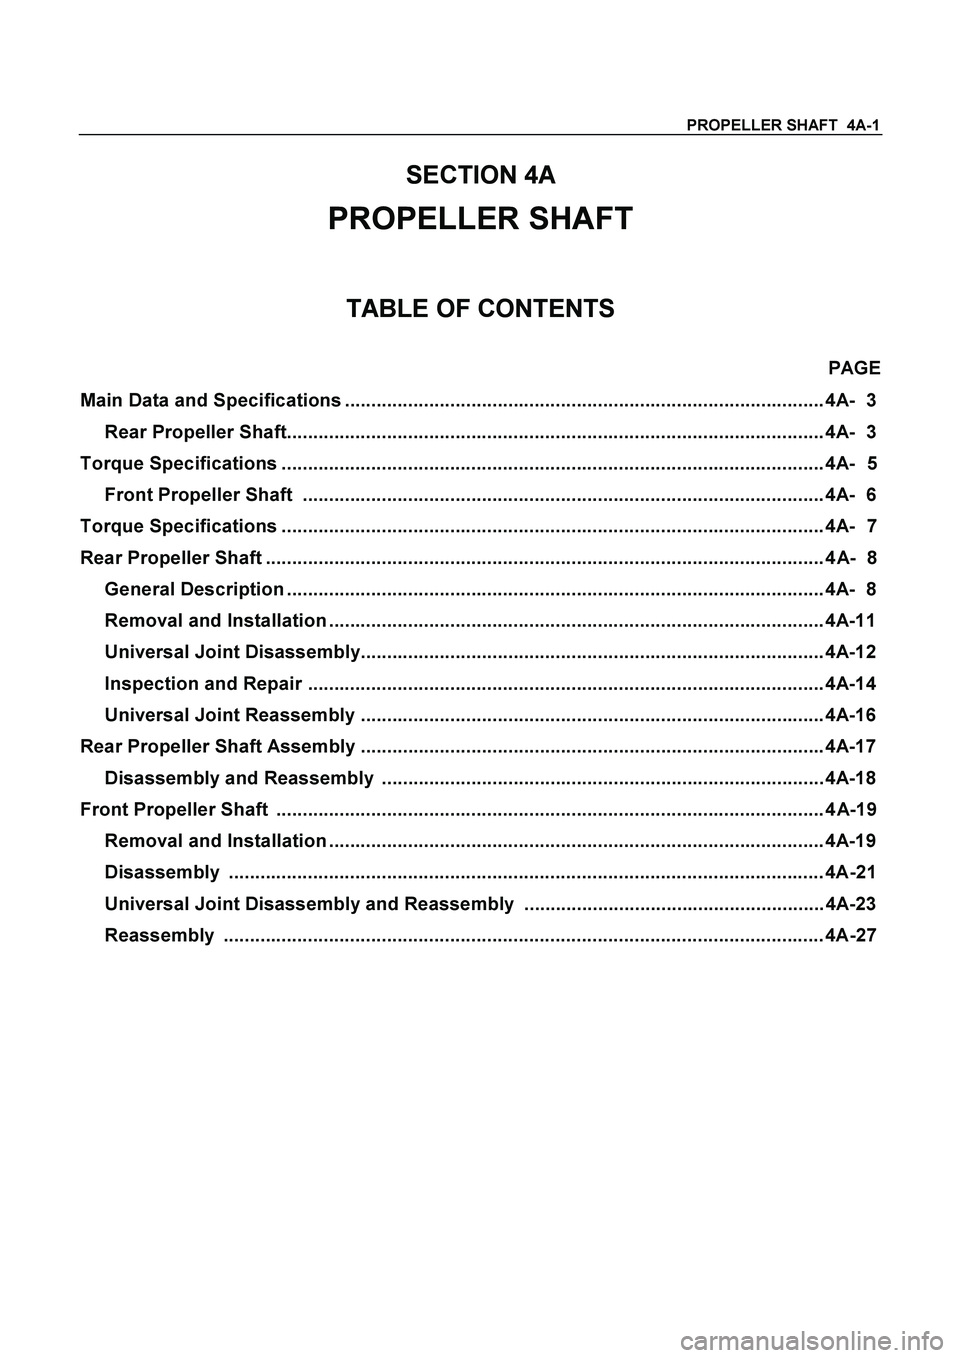 ISUZU TF SERIES 2004  Workshop Manual PROPELLER SHAFT  4A-1 
SECTION 4A 
PROPELLER SHAFT 
TABLE OF CONTENTS 
 PAGE 
Main Data and Specifications ........................................................................................... 4